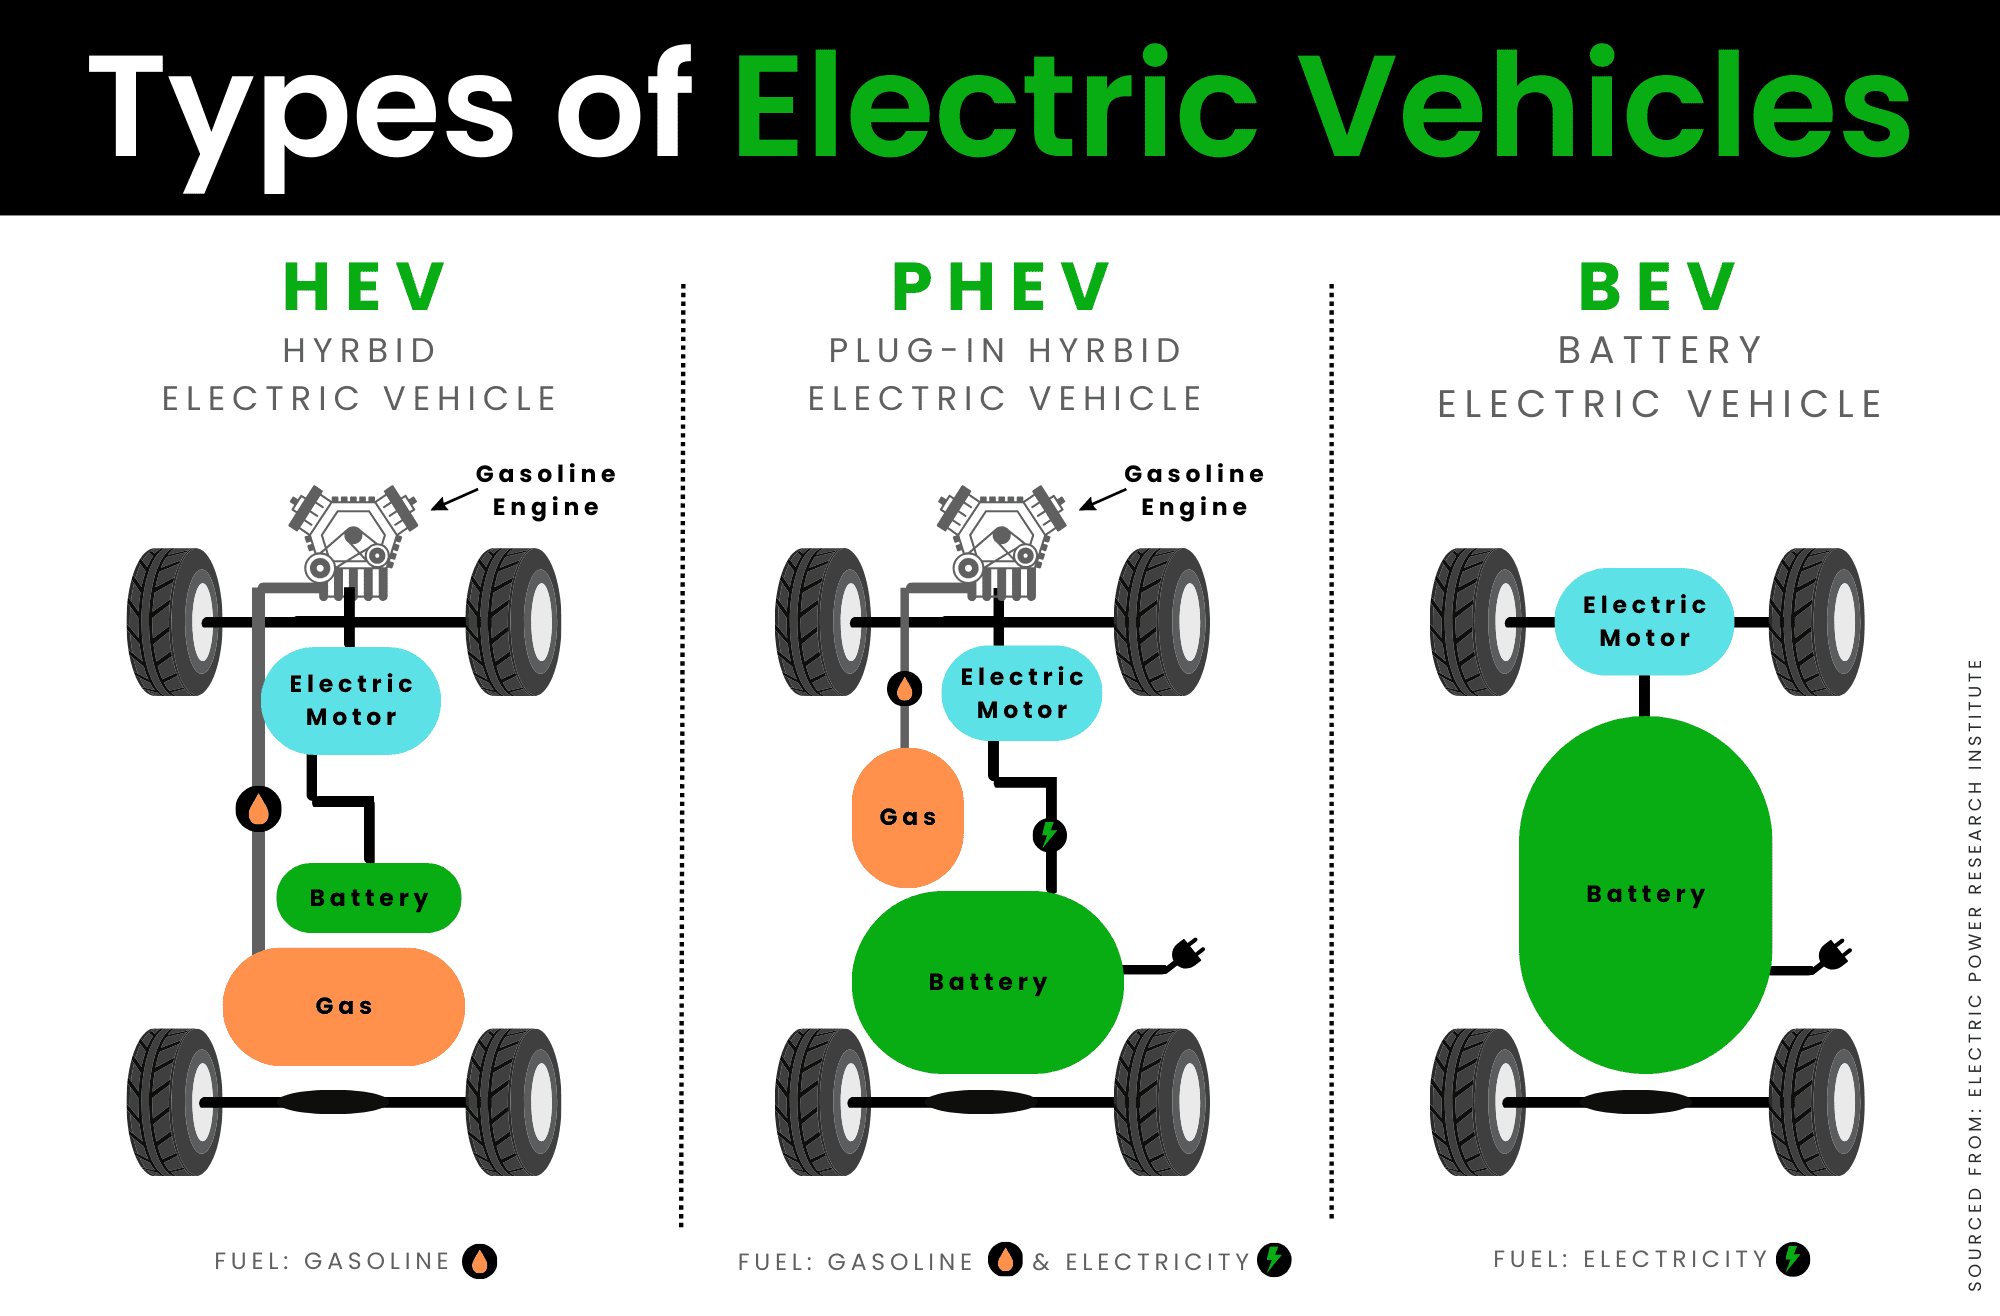 Photo of types of EVs